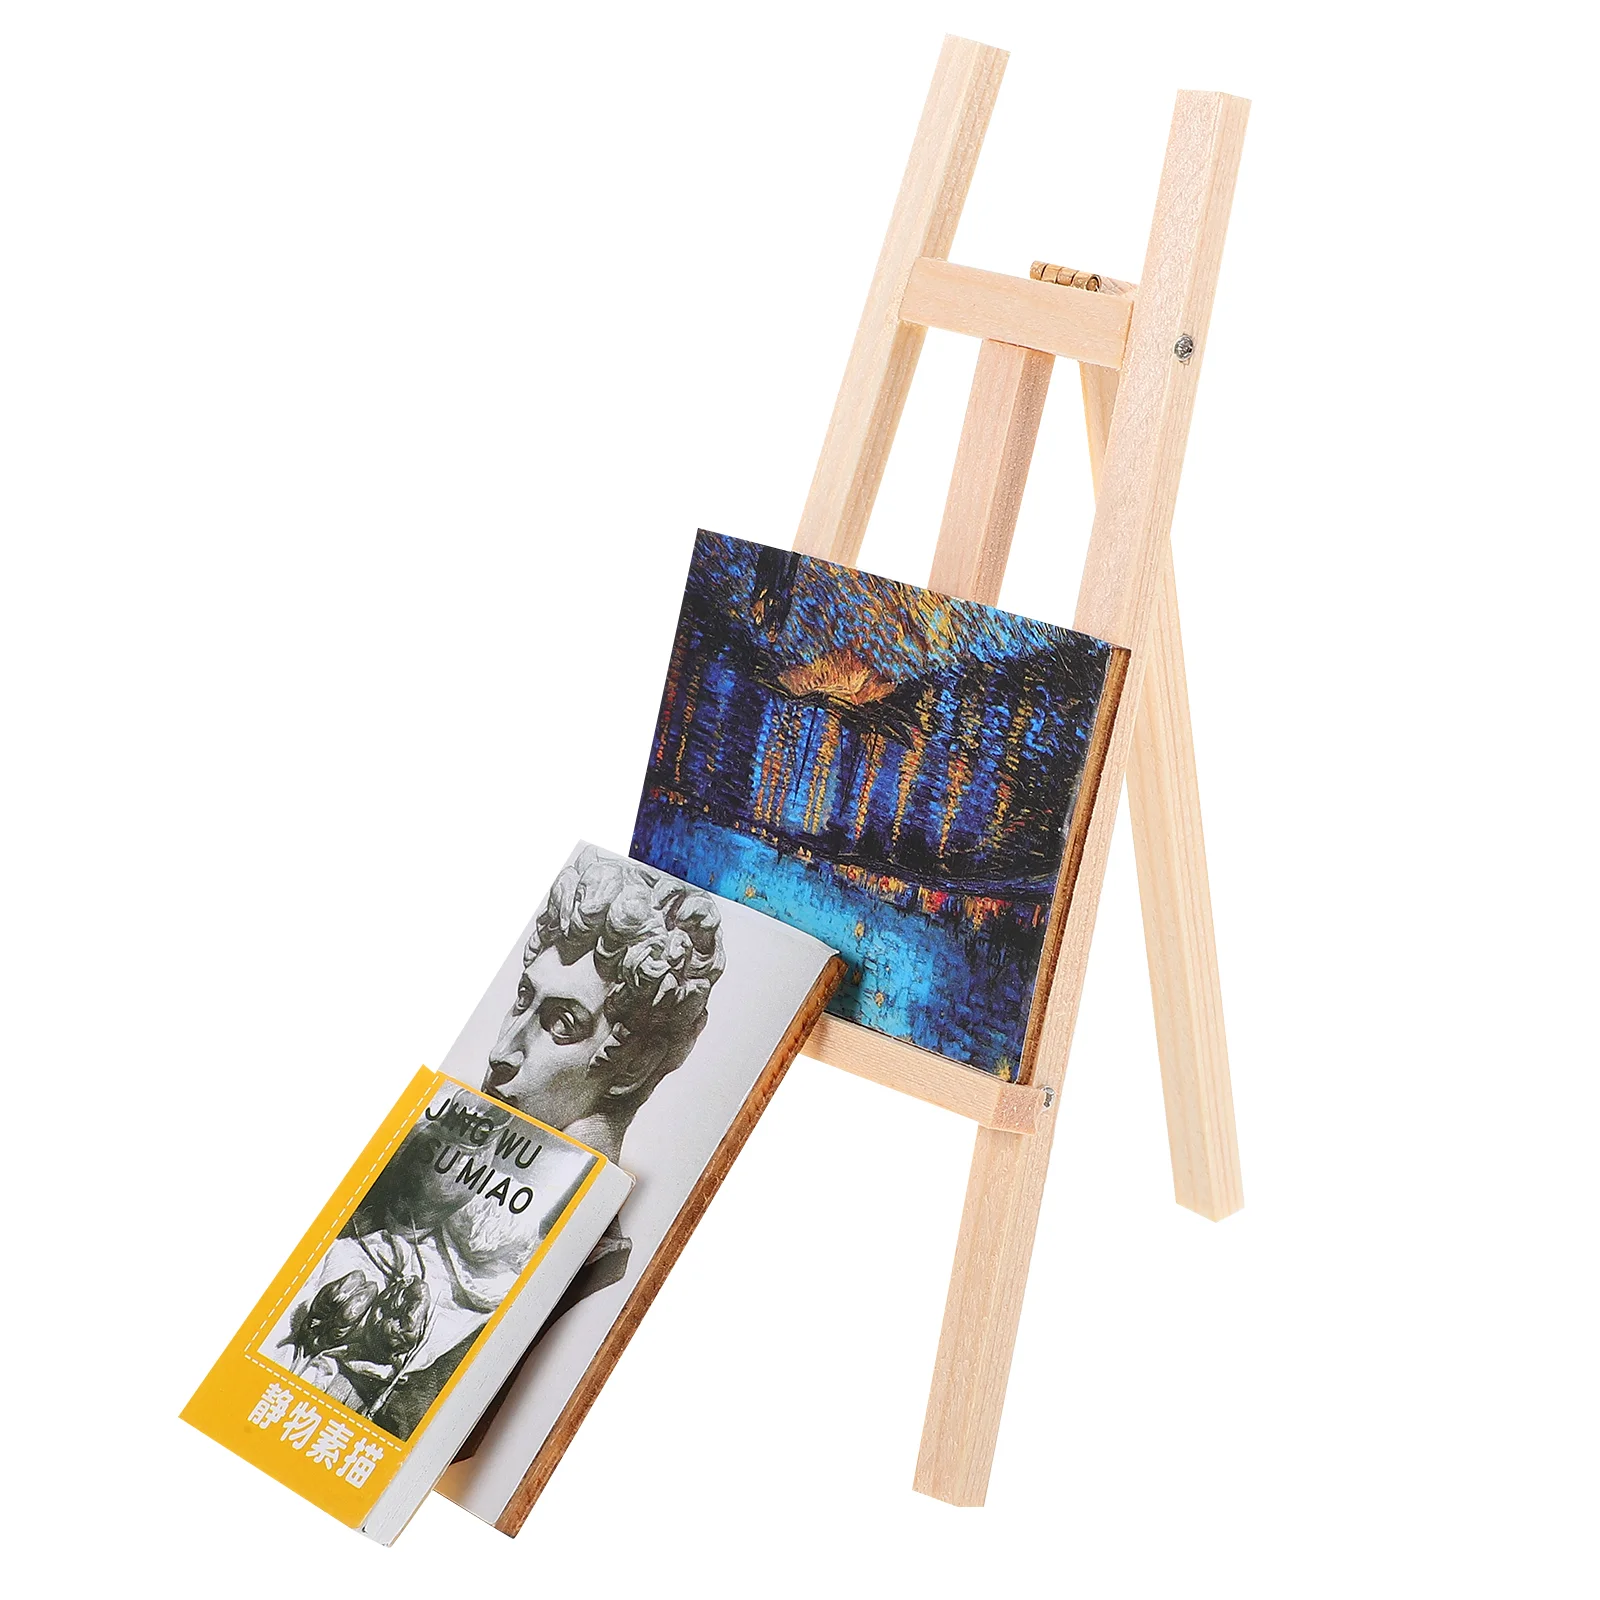 House Decorative Painting Mini Adornment Miniature Easel Wooden Board Furniture Small Model mini easel picture stand photo display small wooden kids painting accessory natural wood mini easel frame tripod display holder